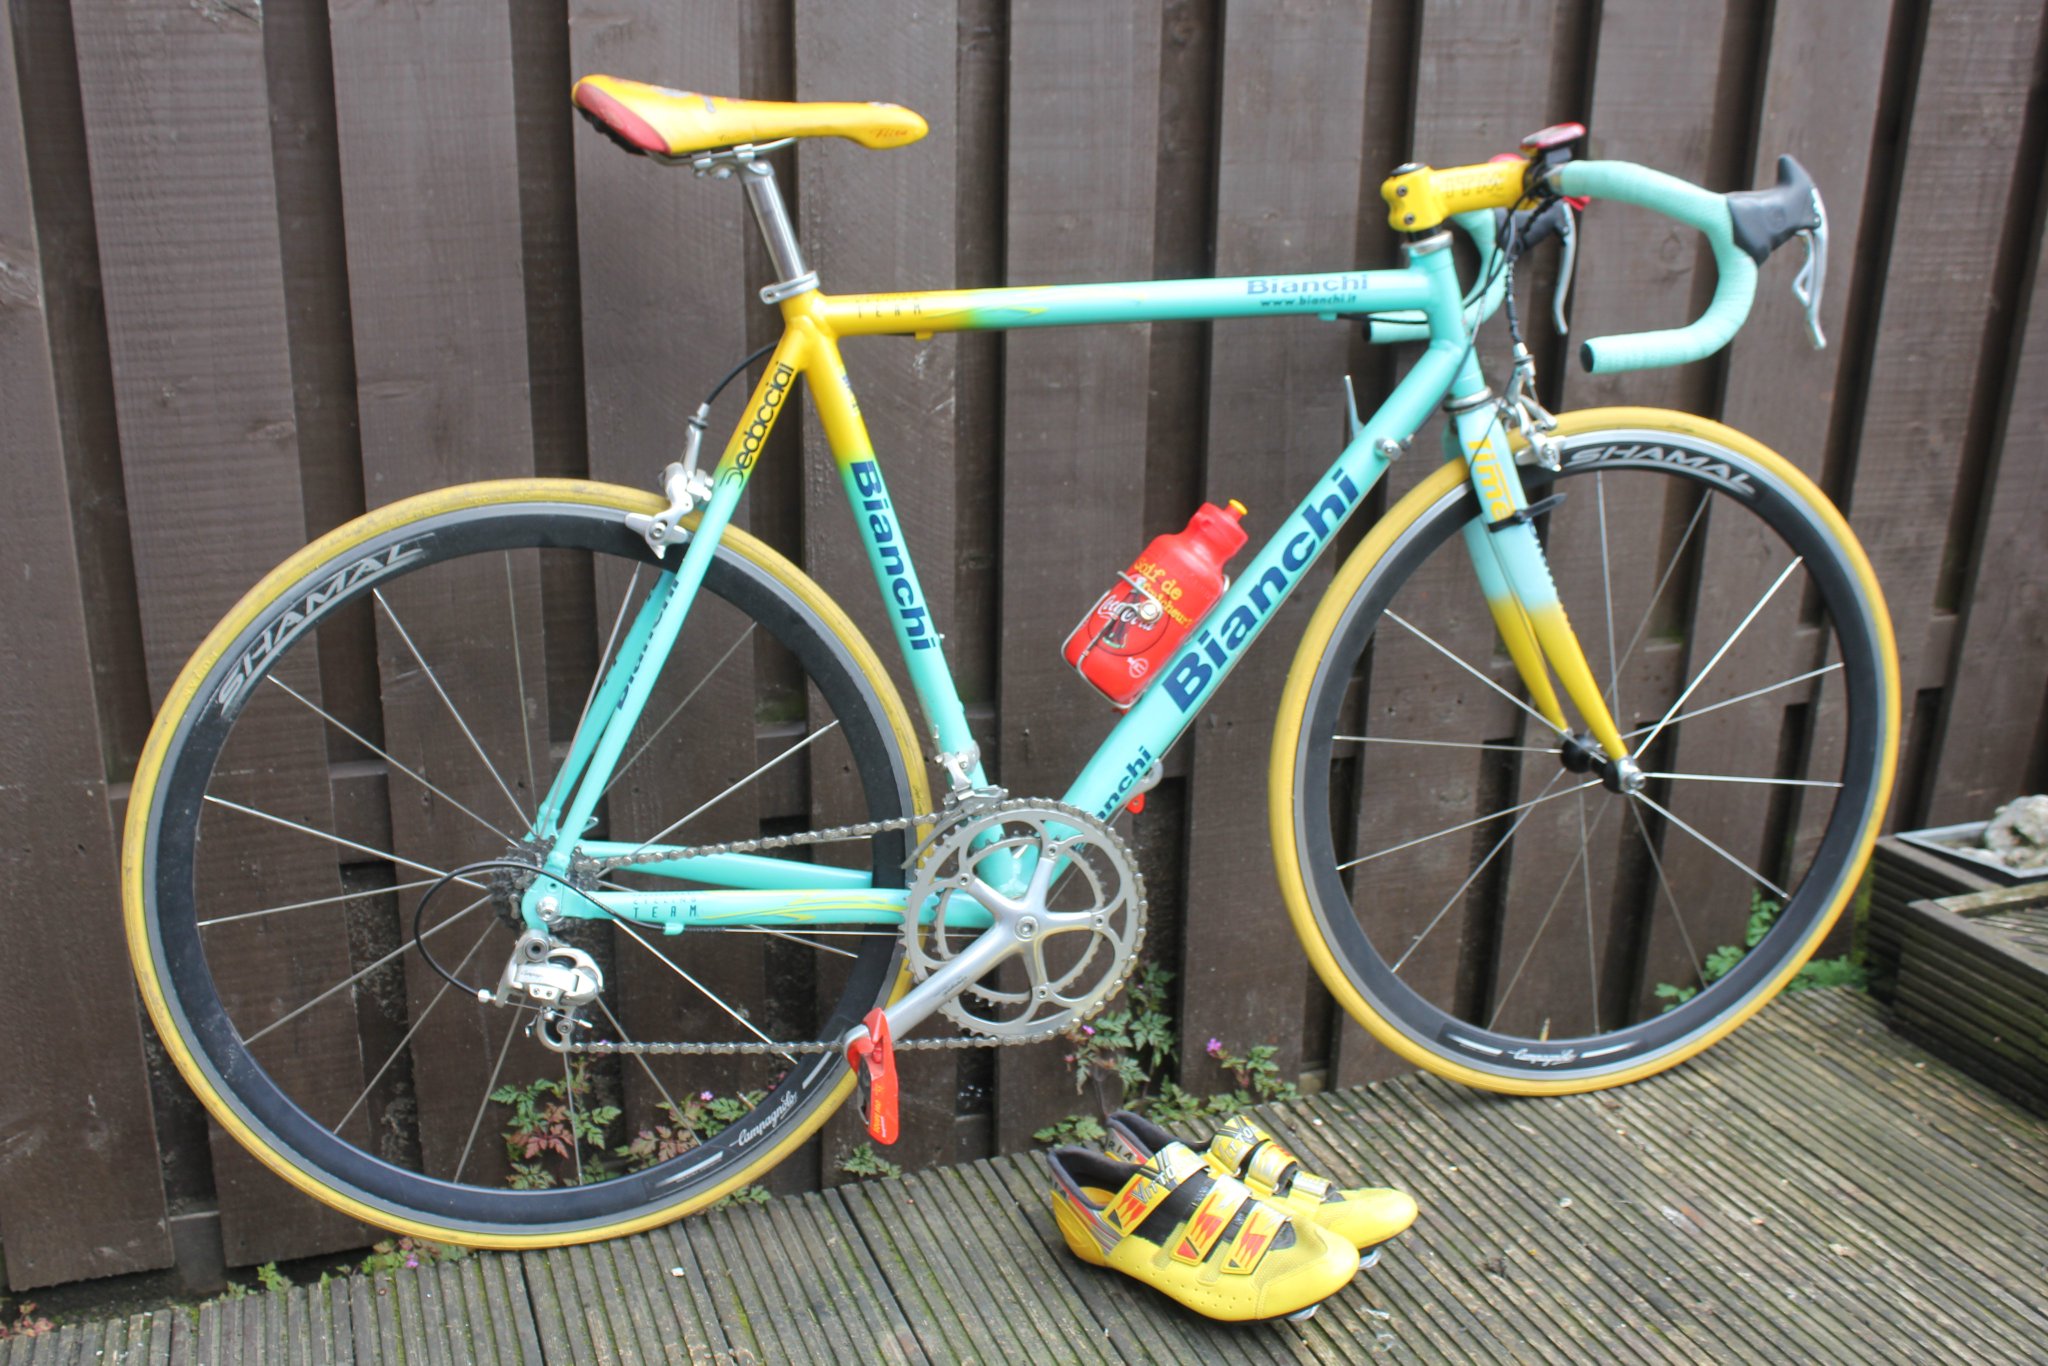 Happy Birthday Marco Pantani.

Time for the annual pictures of my little tribute bike. 